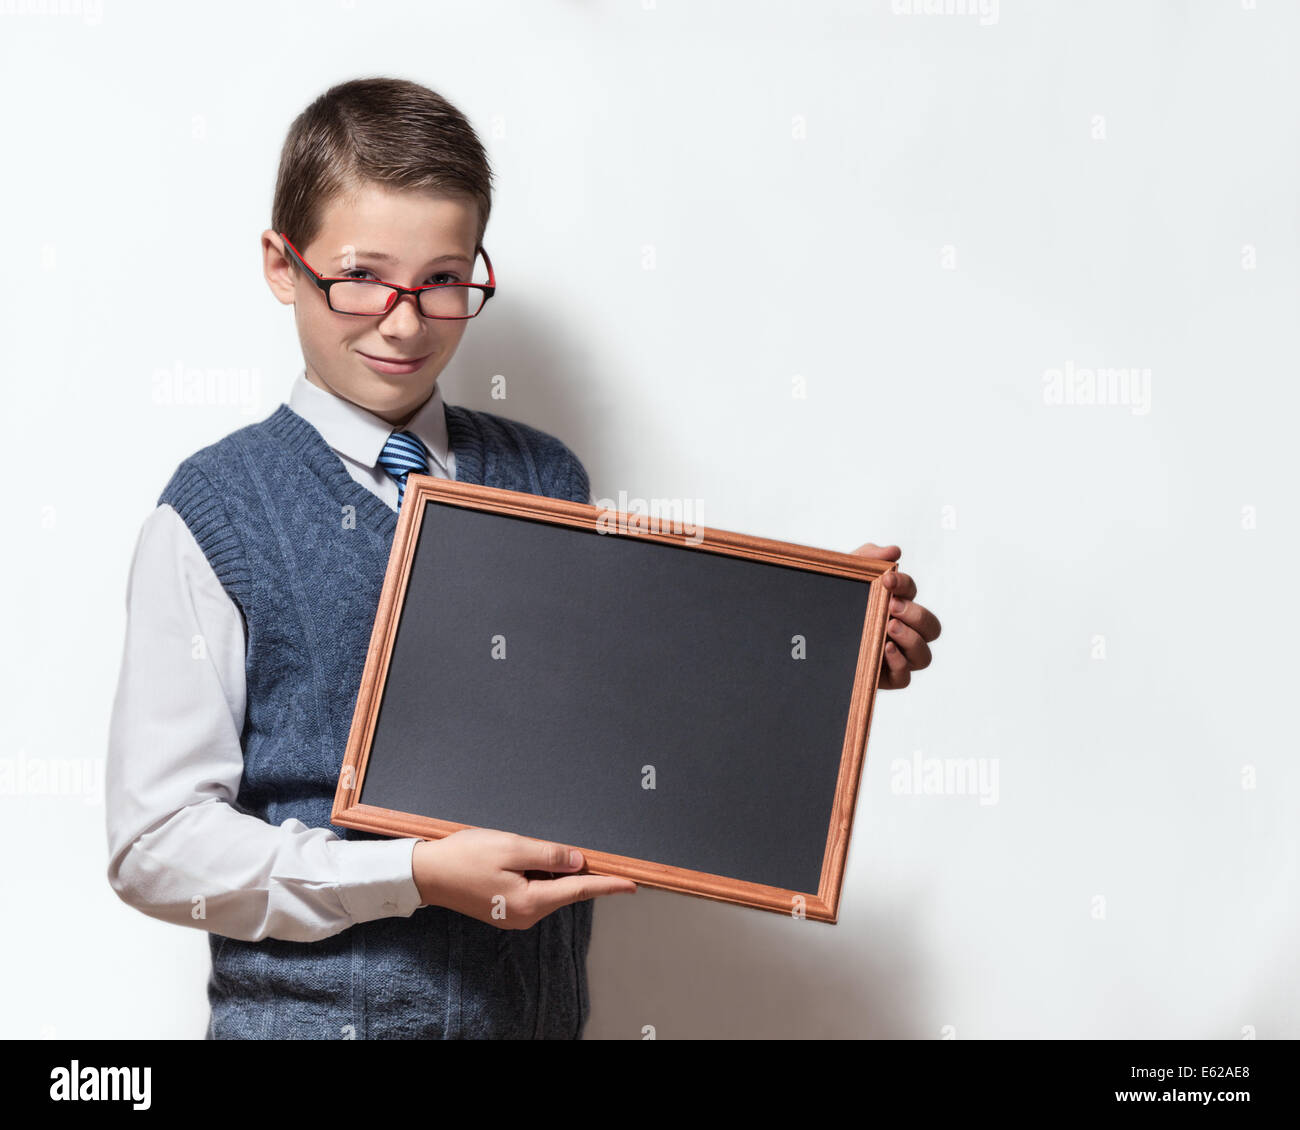 The cute smart schoolboy teenager in a glasses shows the empty black chalkboard with the place for text Stock Photo